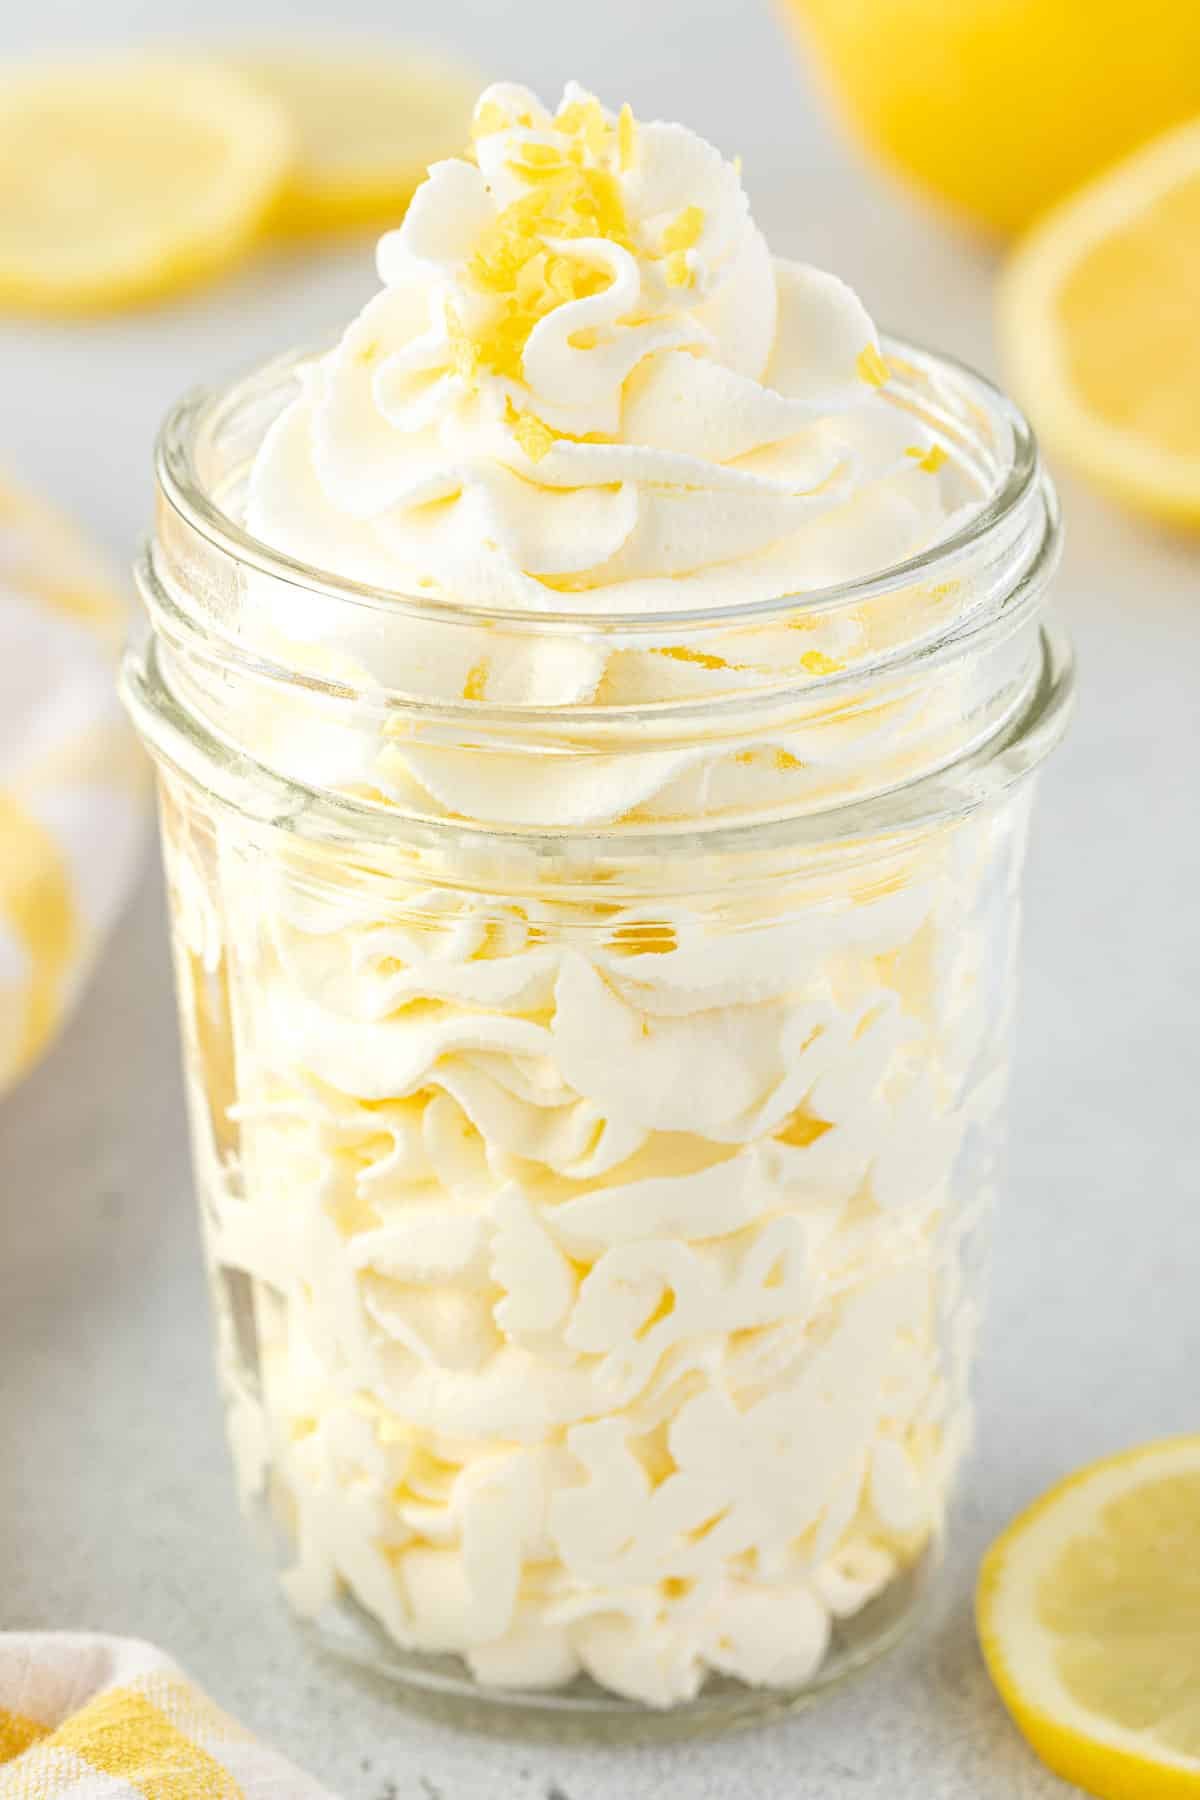 Whipped cream piped in a jar with lemon zest on top.